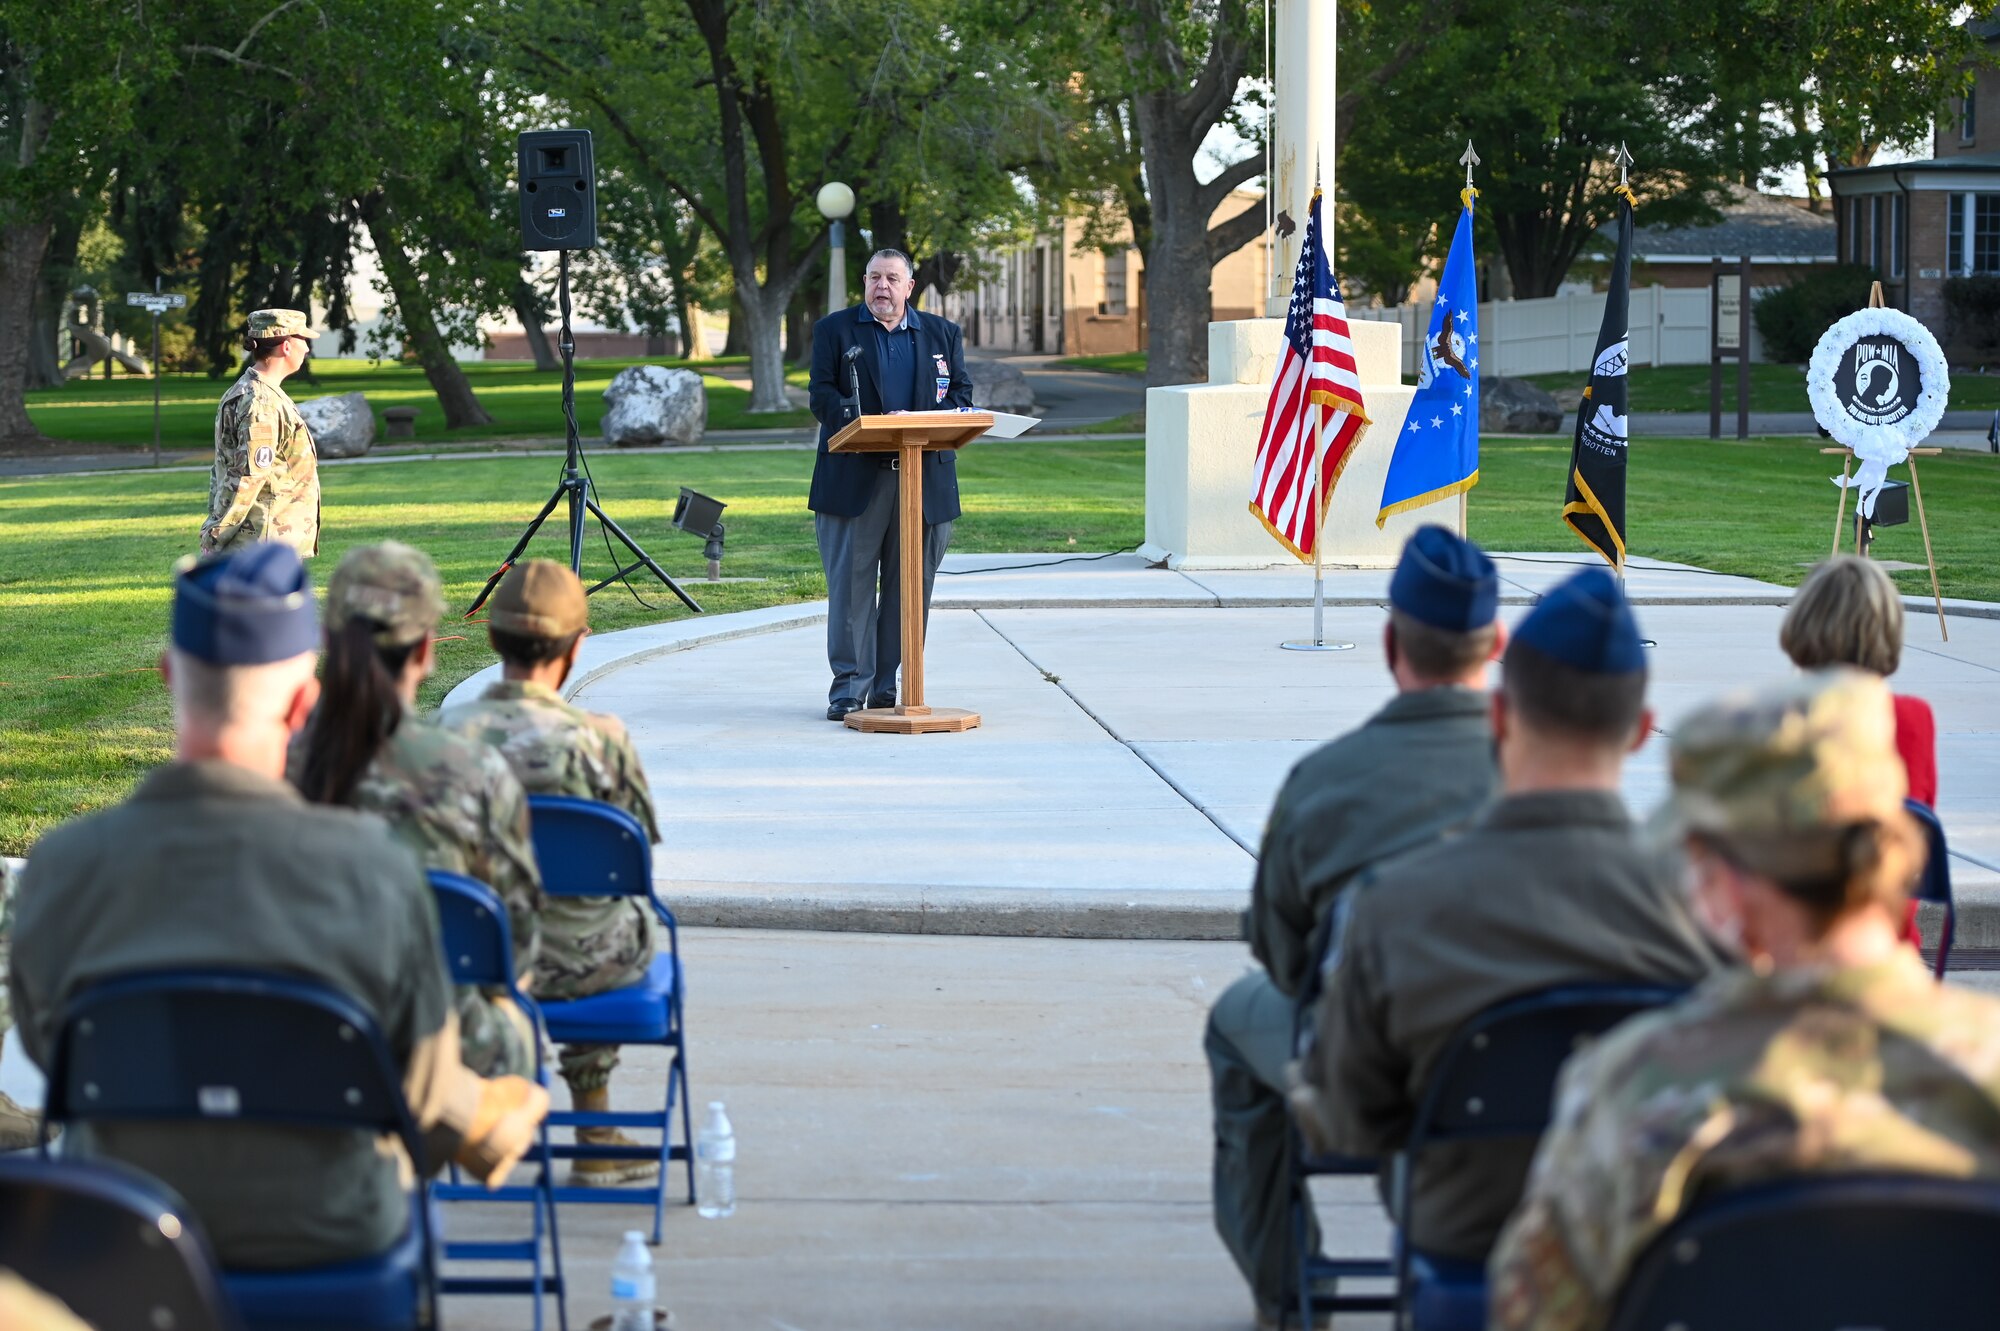 Former prisoner of war and retired Air Force Capt. William Robinson speaks during the POW/MIA ceremony Sept. 17, 2021, at Hill Air Force Base, Utah. Robinson, who was a POW for nearly eight years before being released, was the featured speaker. (U.S. Air Force photo by Cynthia Griggs)